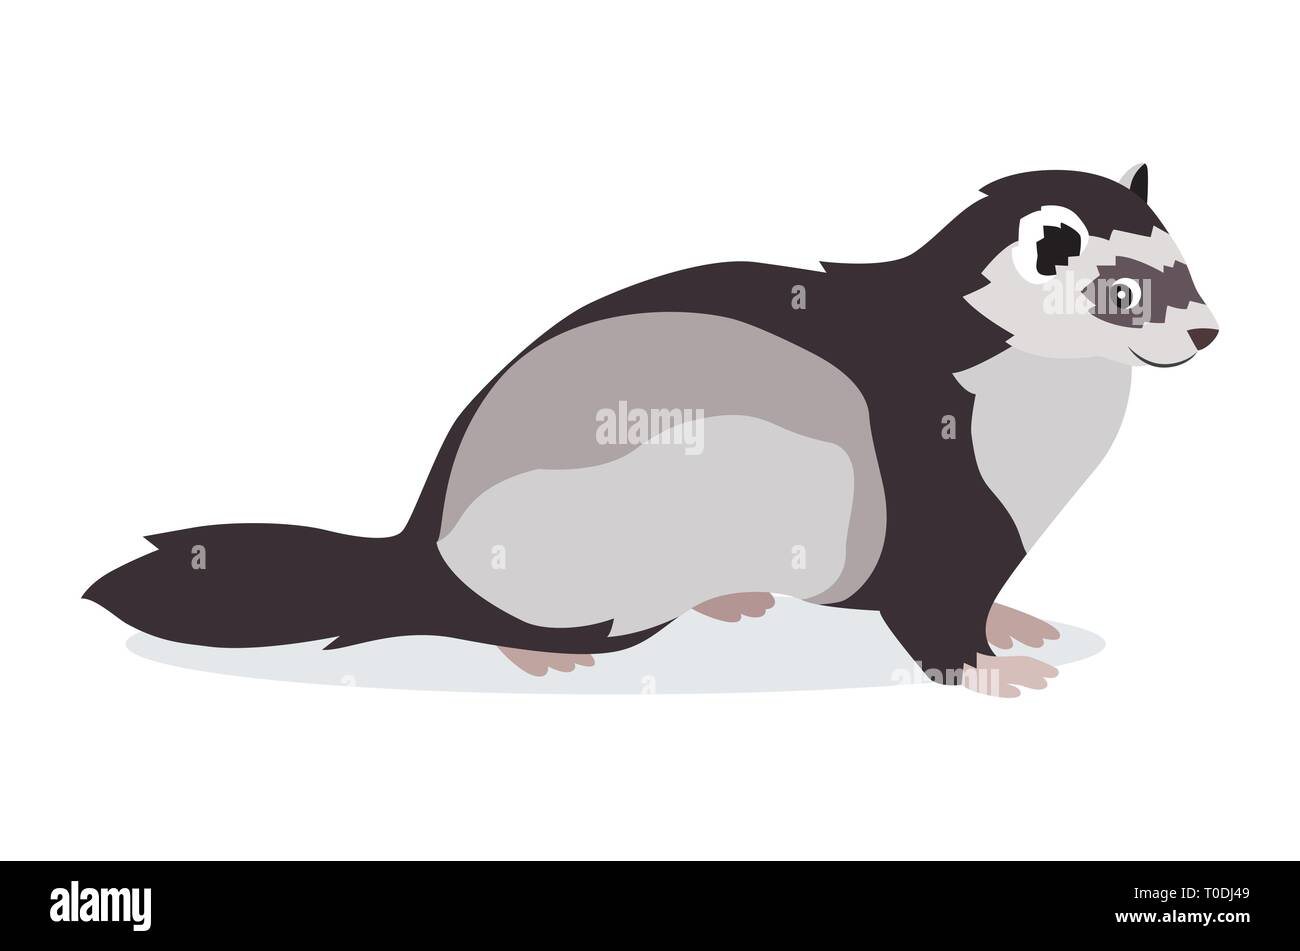 Cute gray ferret icon isolated on white background, small fluffy pet, domestic animal, vector illustration Stock Vector